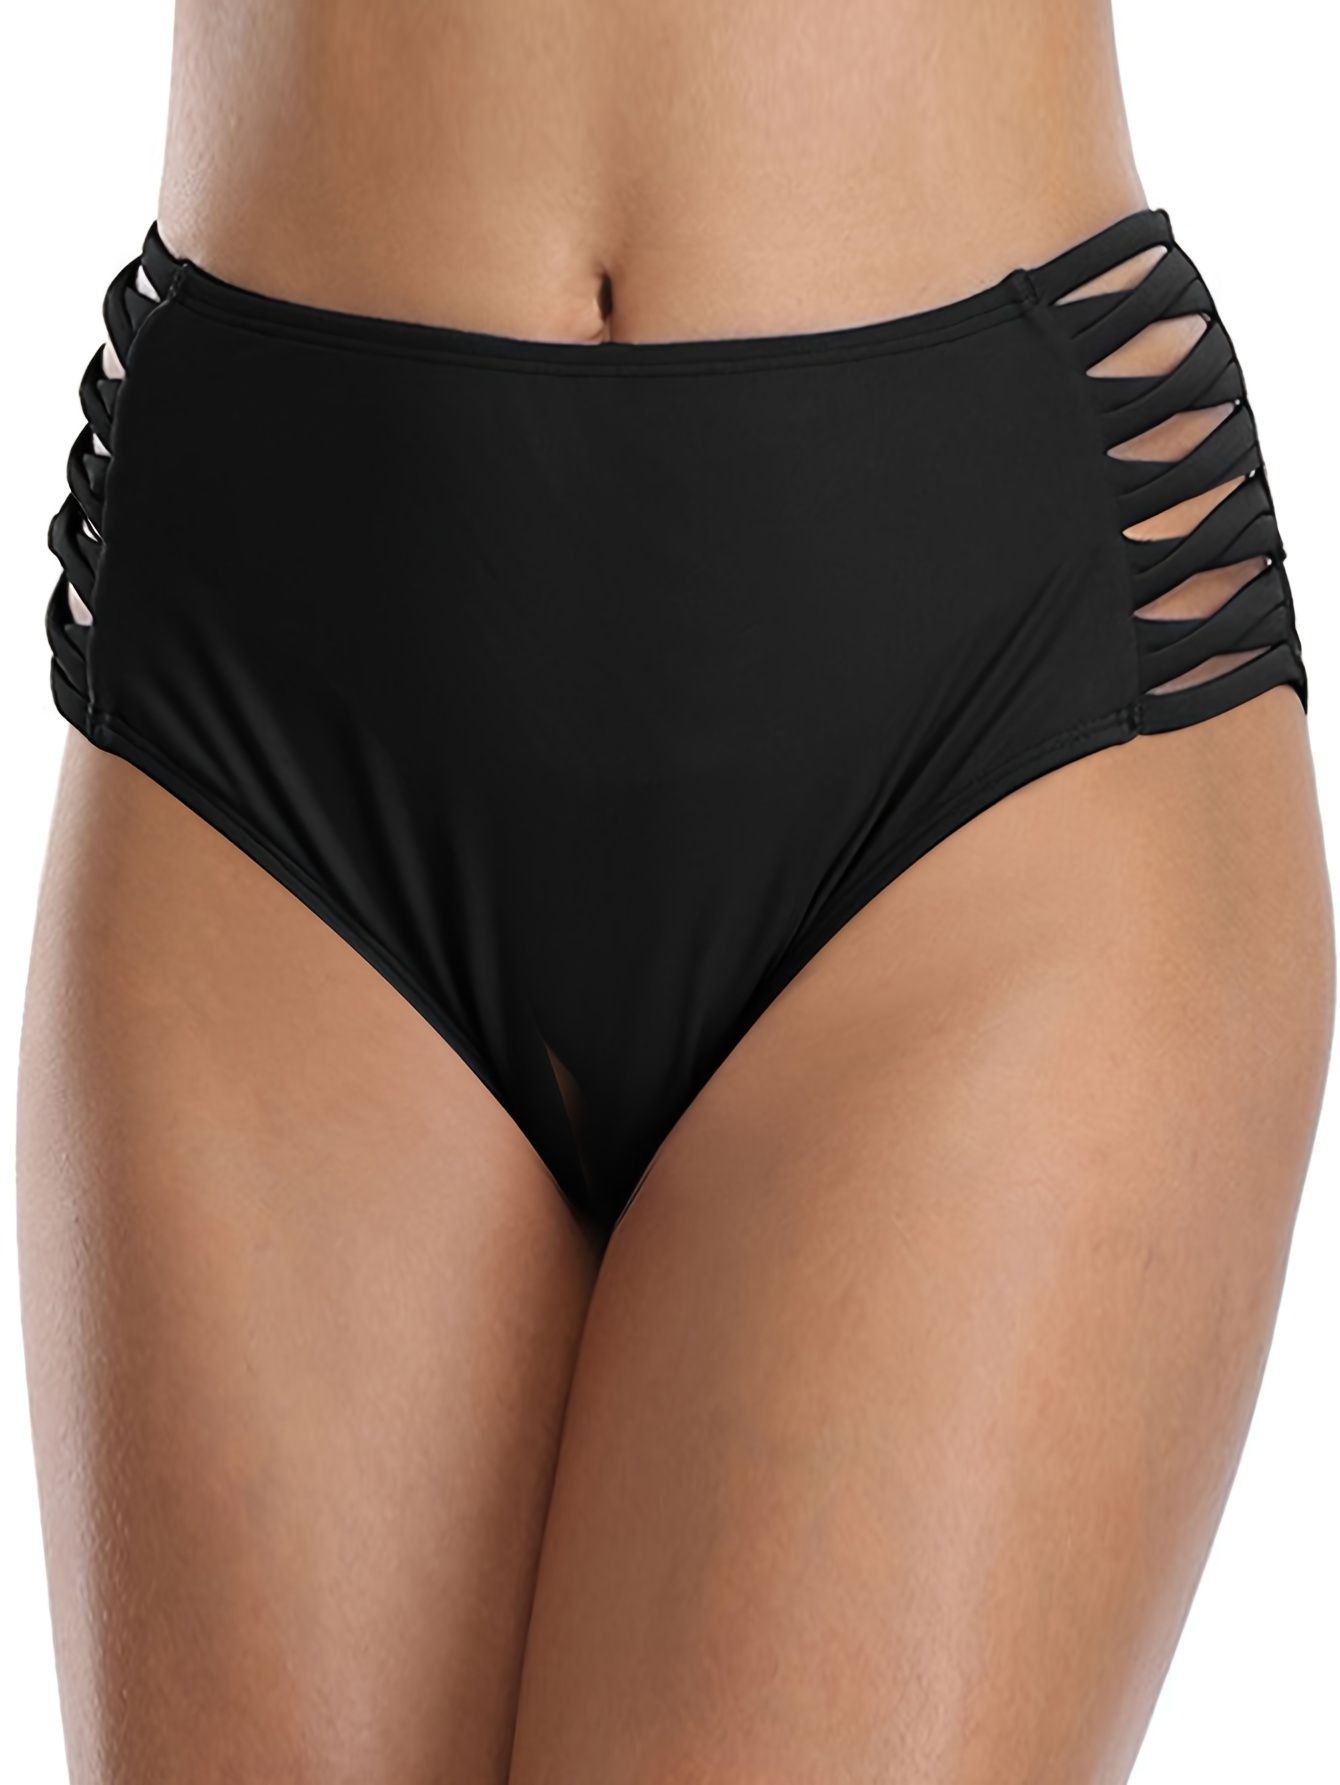 High Waisted Panty for Women's Criss Cross Strappy Bikini Brief